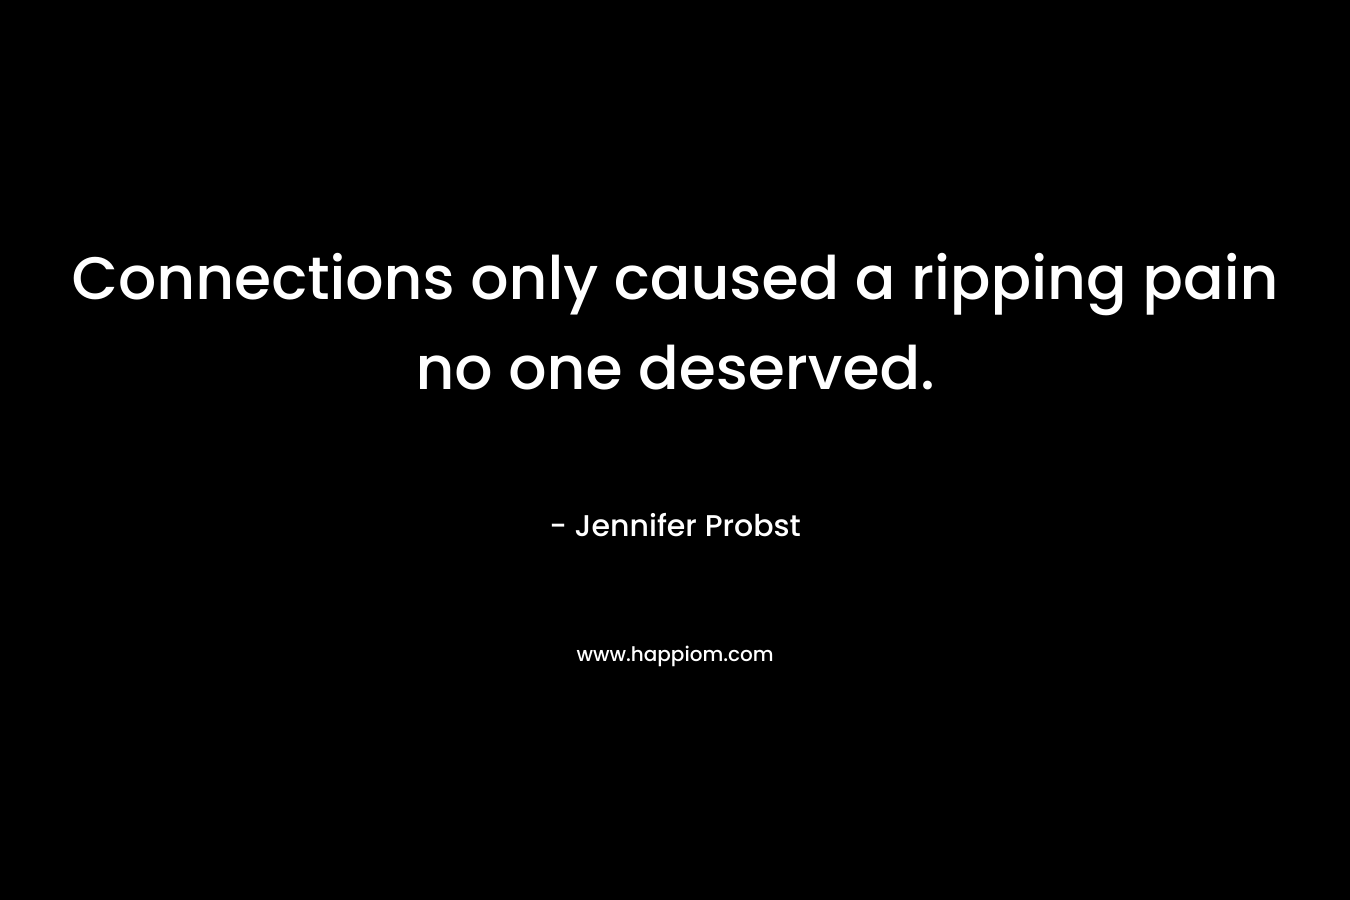 Connections only caused a ripping pain no one deserved. – Jennifer Probst